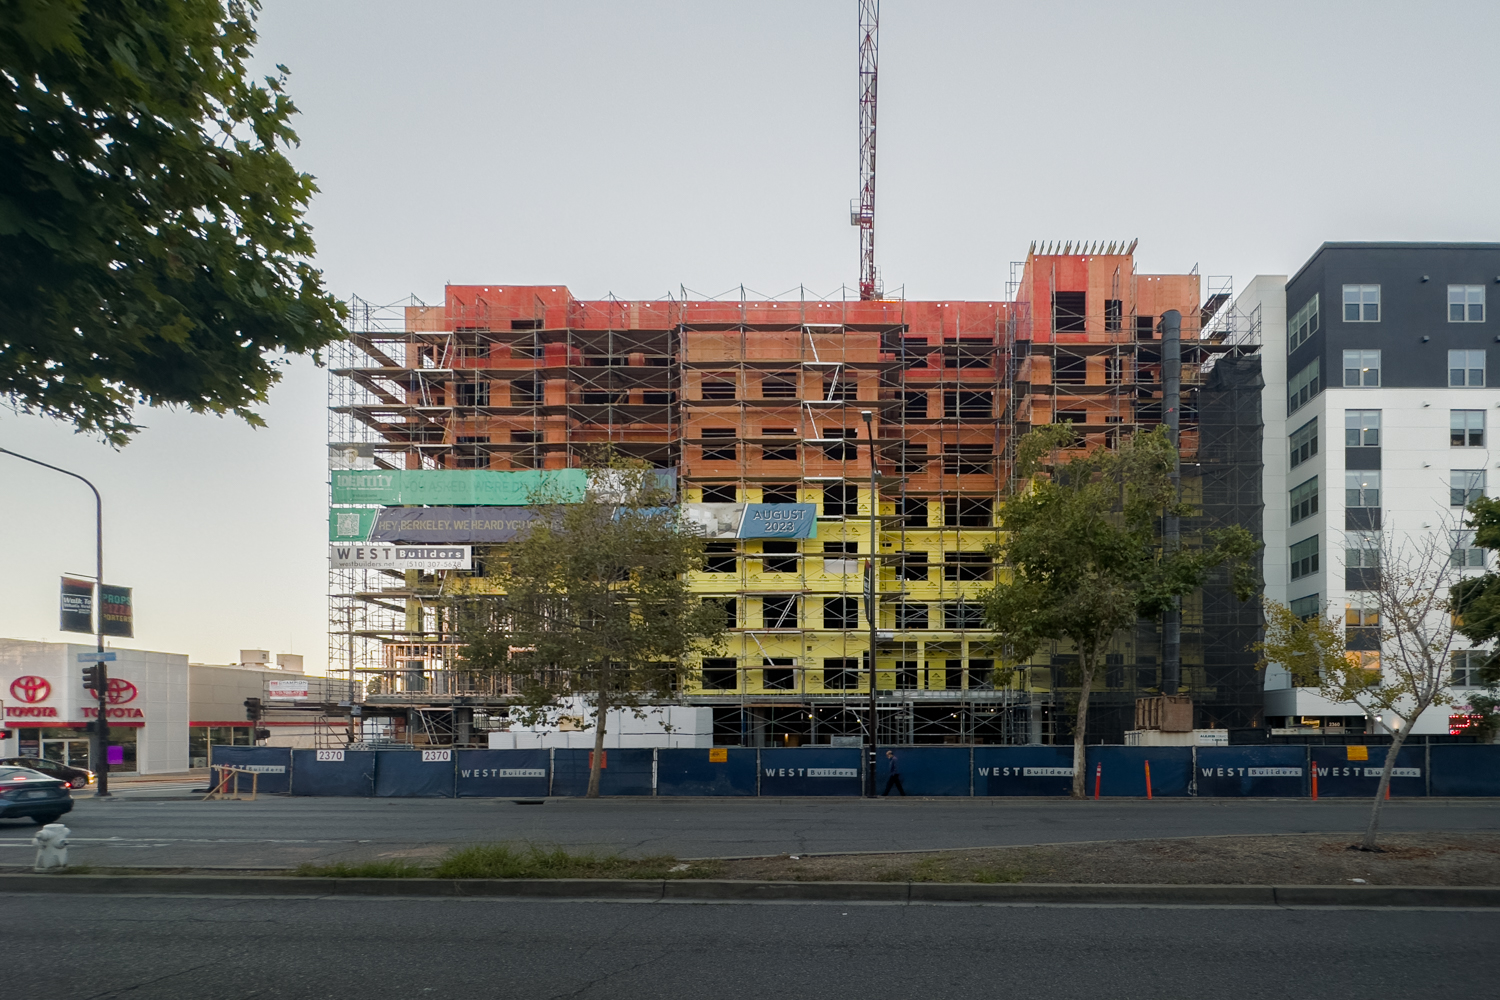 2370 Shattuck Avenue viewed next to Phase 1, image by author